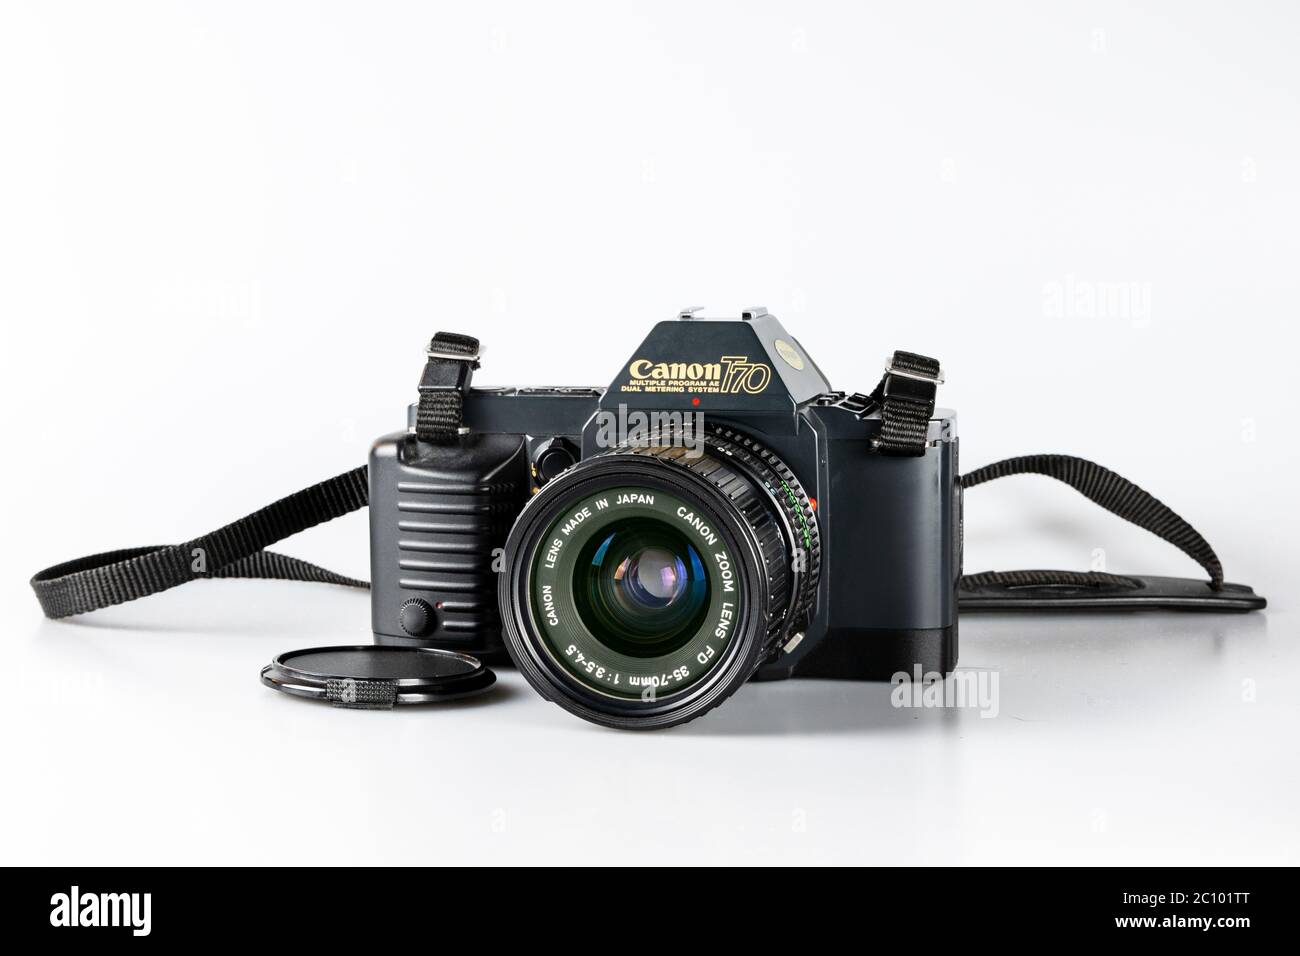 Canon T70 camera from 1984 with a 35-70mm lens Stock Photo